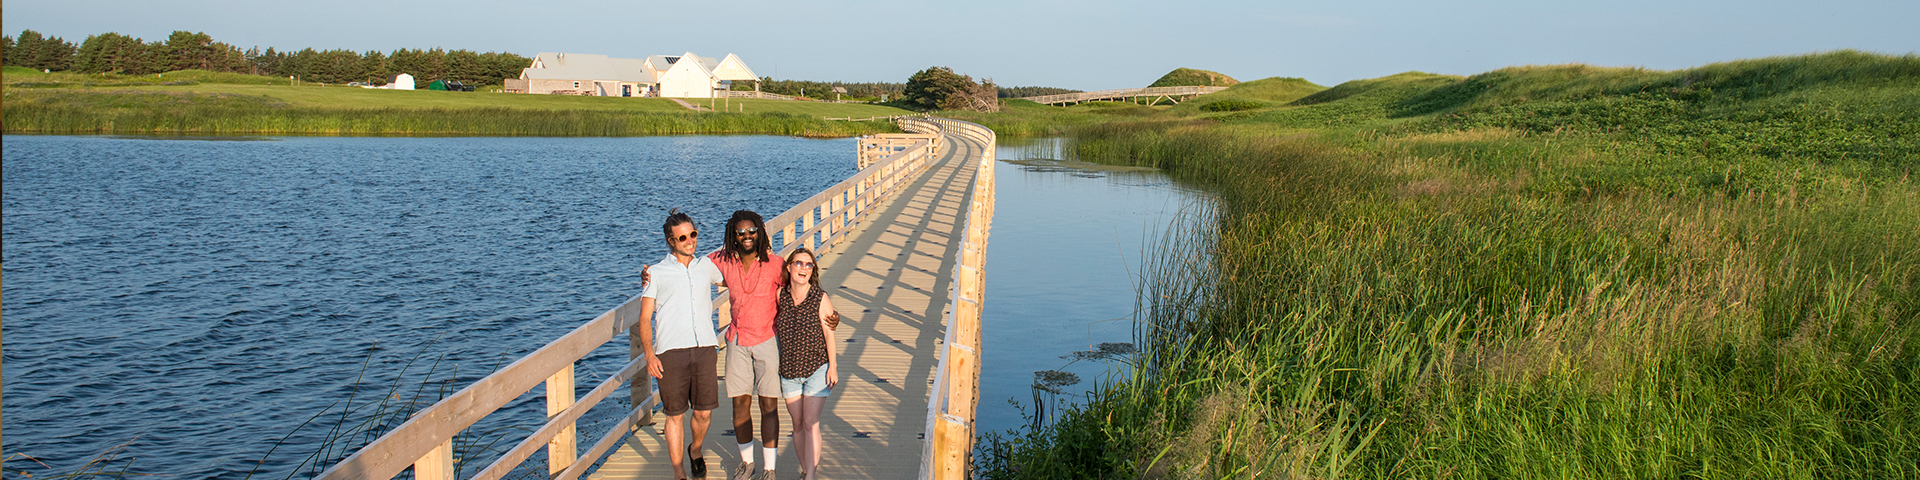 Visitors walk across a floating boardwalk on Cavendish Duneslands Trail with the Cavendish Beach facilities in the background on a summer day in Prince Edward Island National Park.